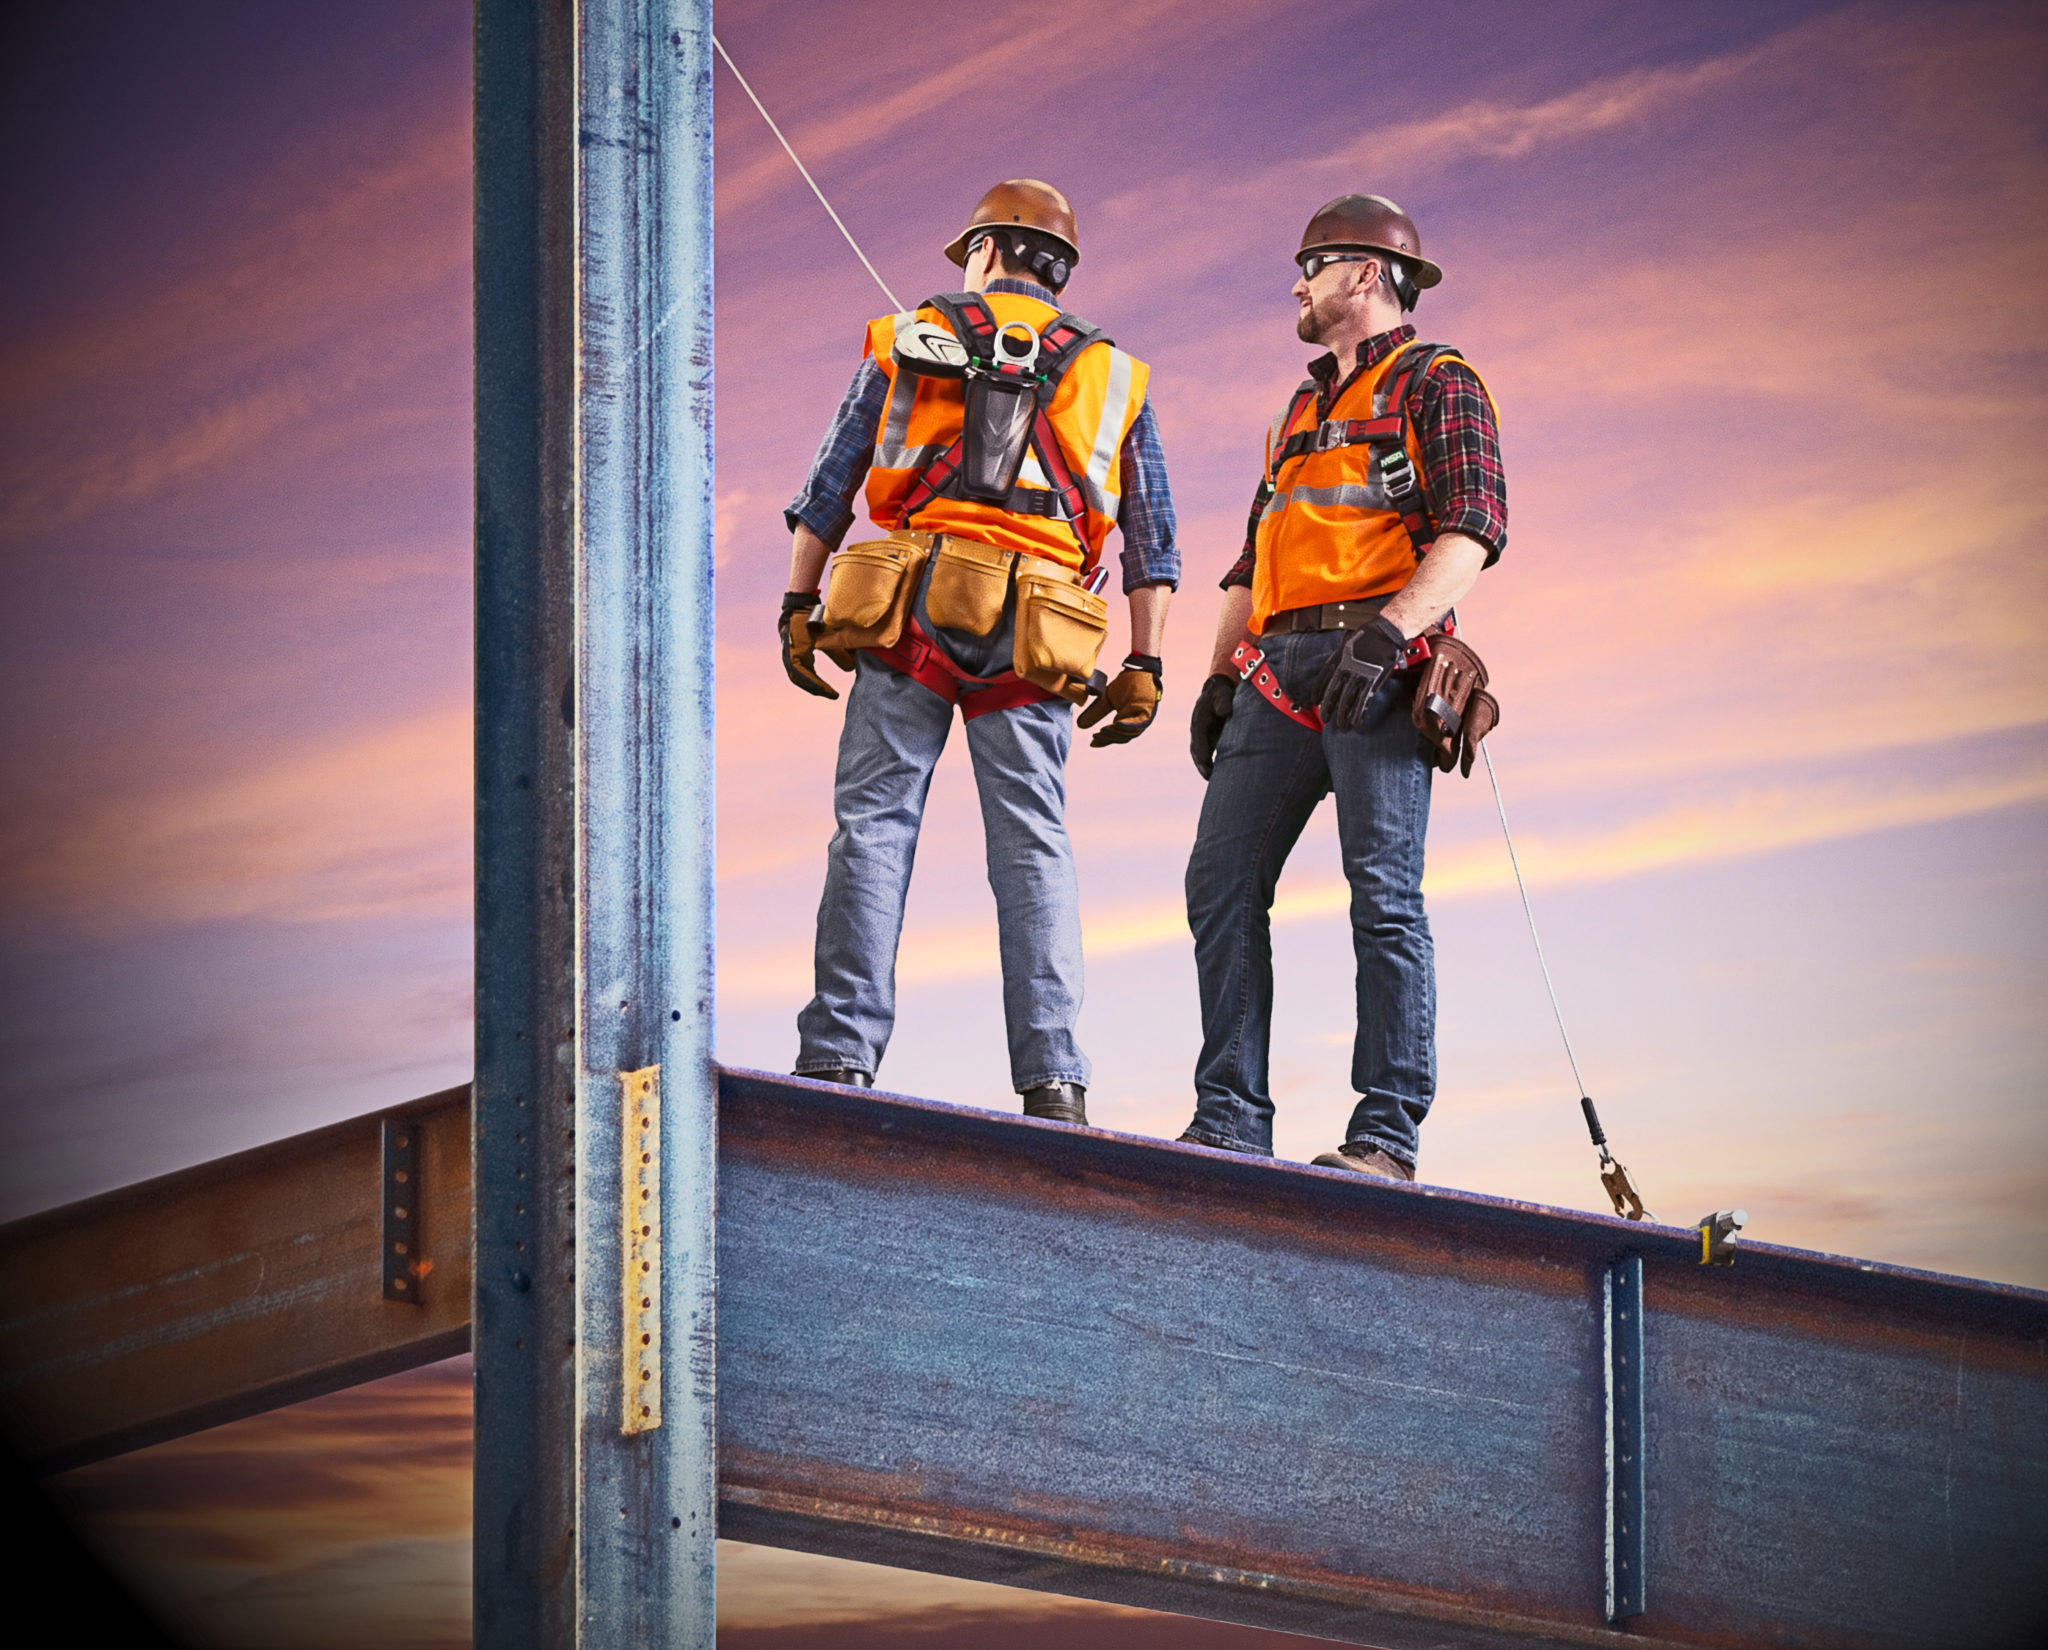 Two construction workers standing on a girder at sunset